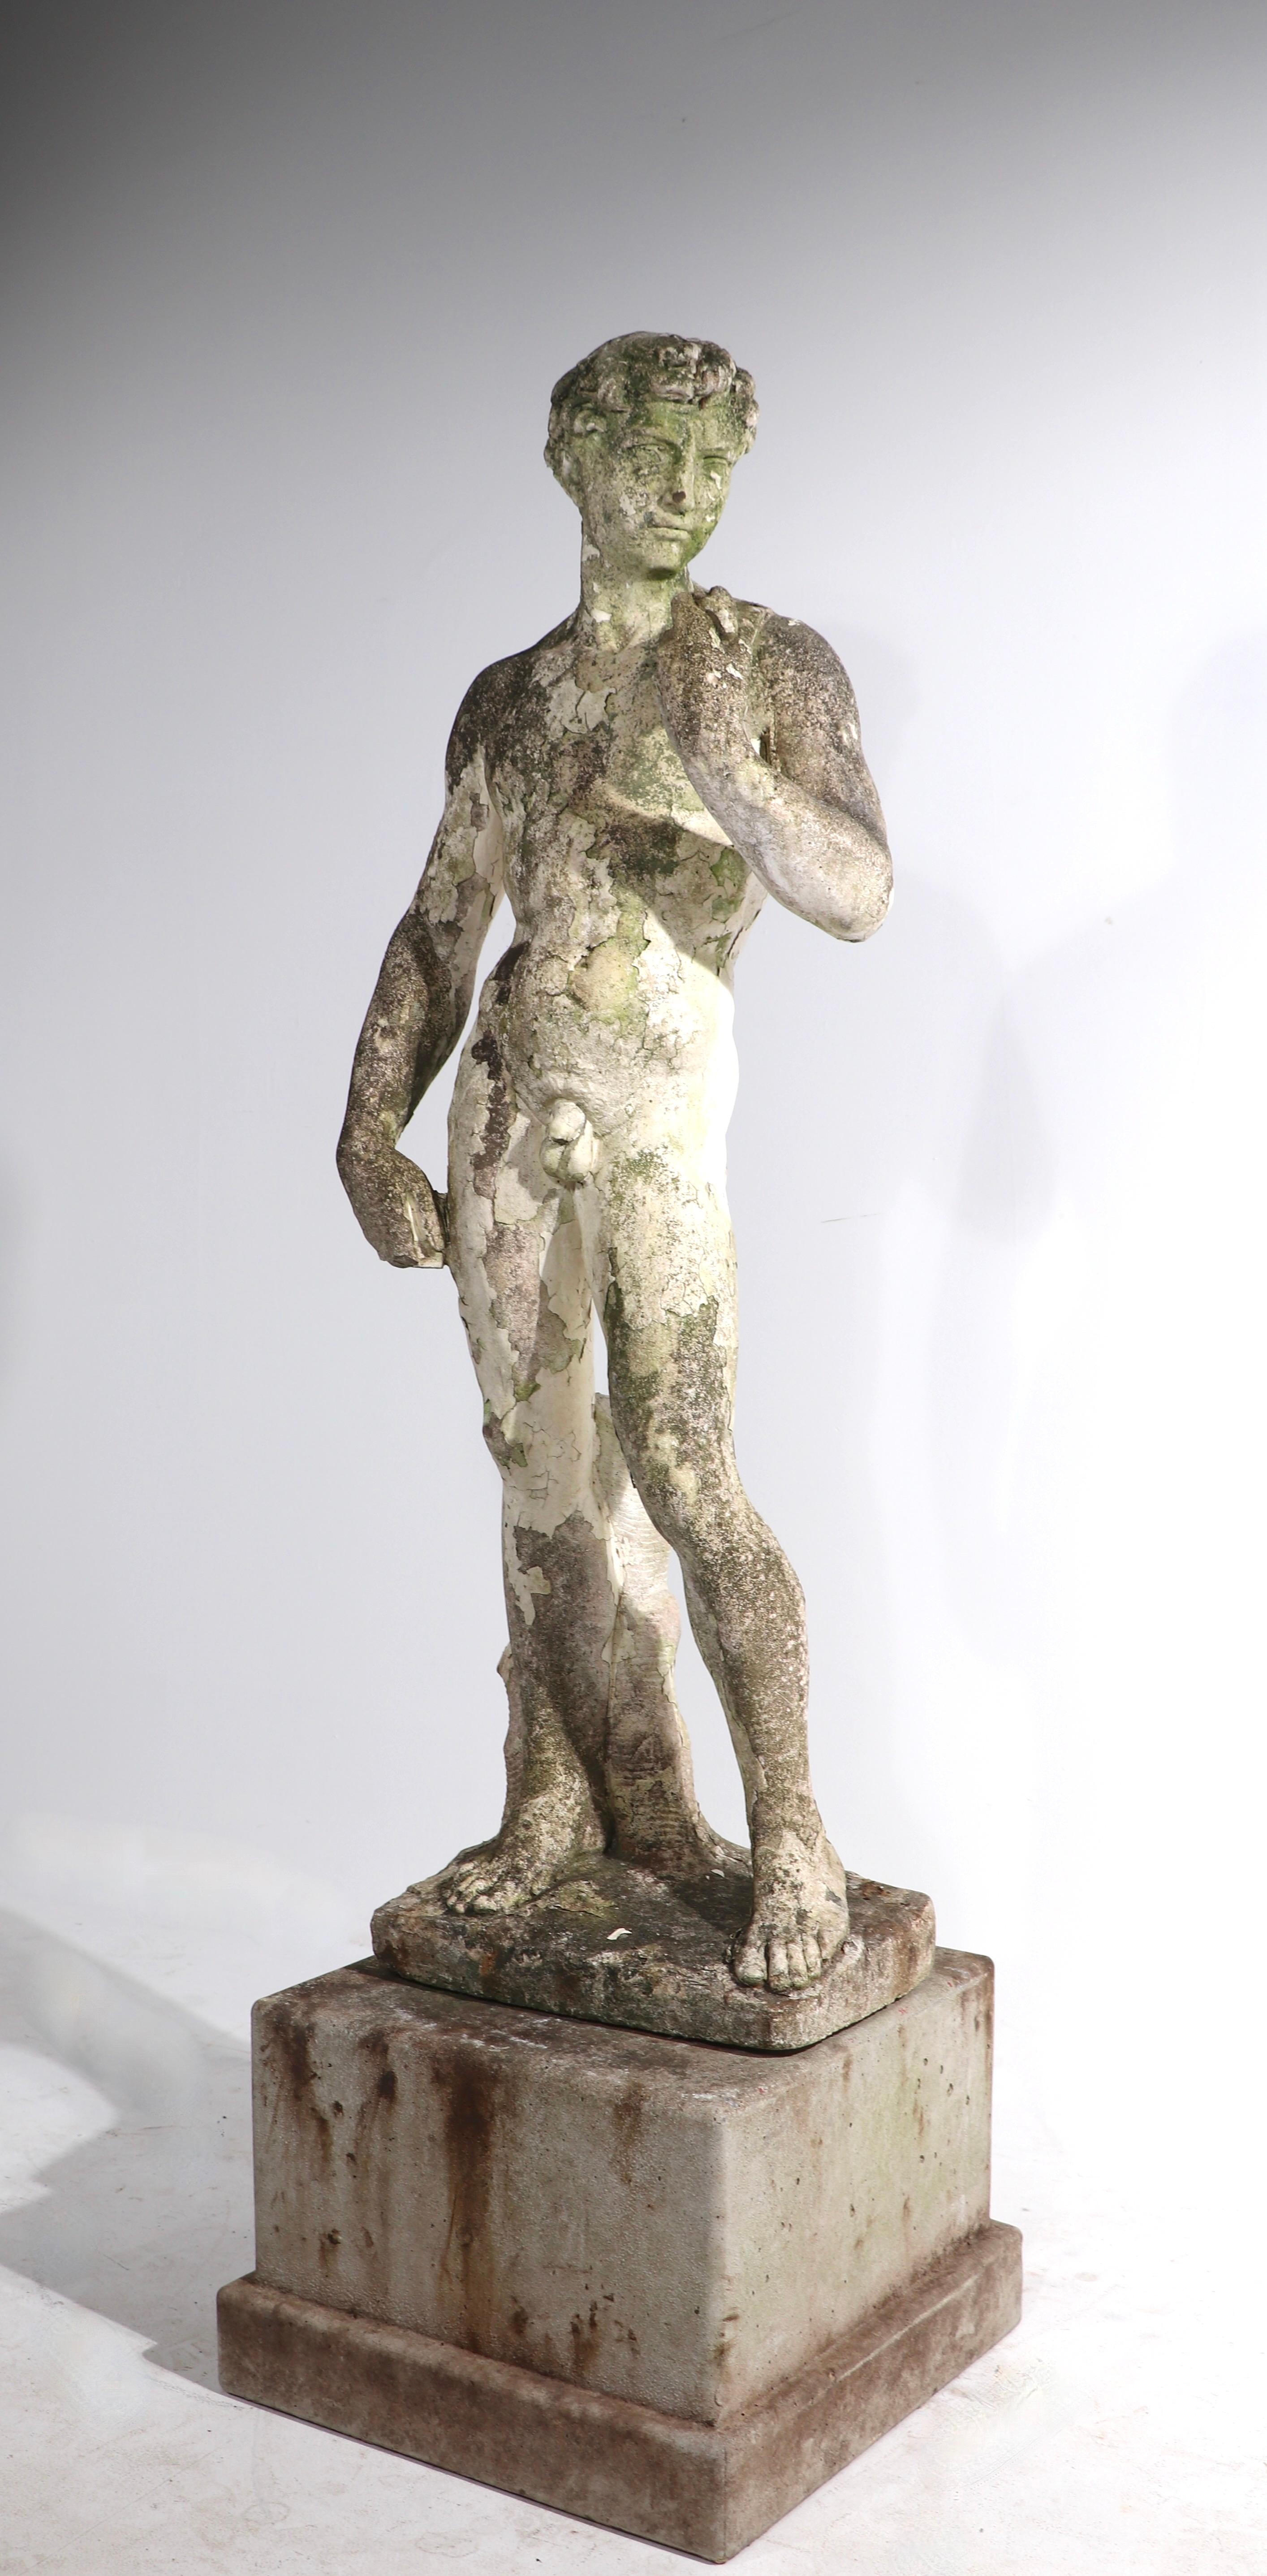 Charming vintage poured stone statue of David, on cement block pedestal. Wonderful aged patina, free of loss, structural damage or repairs. Suitable for indoor or outdoor use, figure H w/o base 45 in. x Total H 56 in. Base 16.5 x 16.5 x 11 in. H.